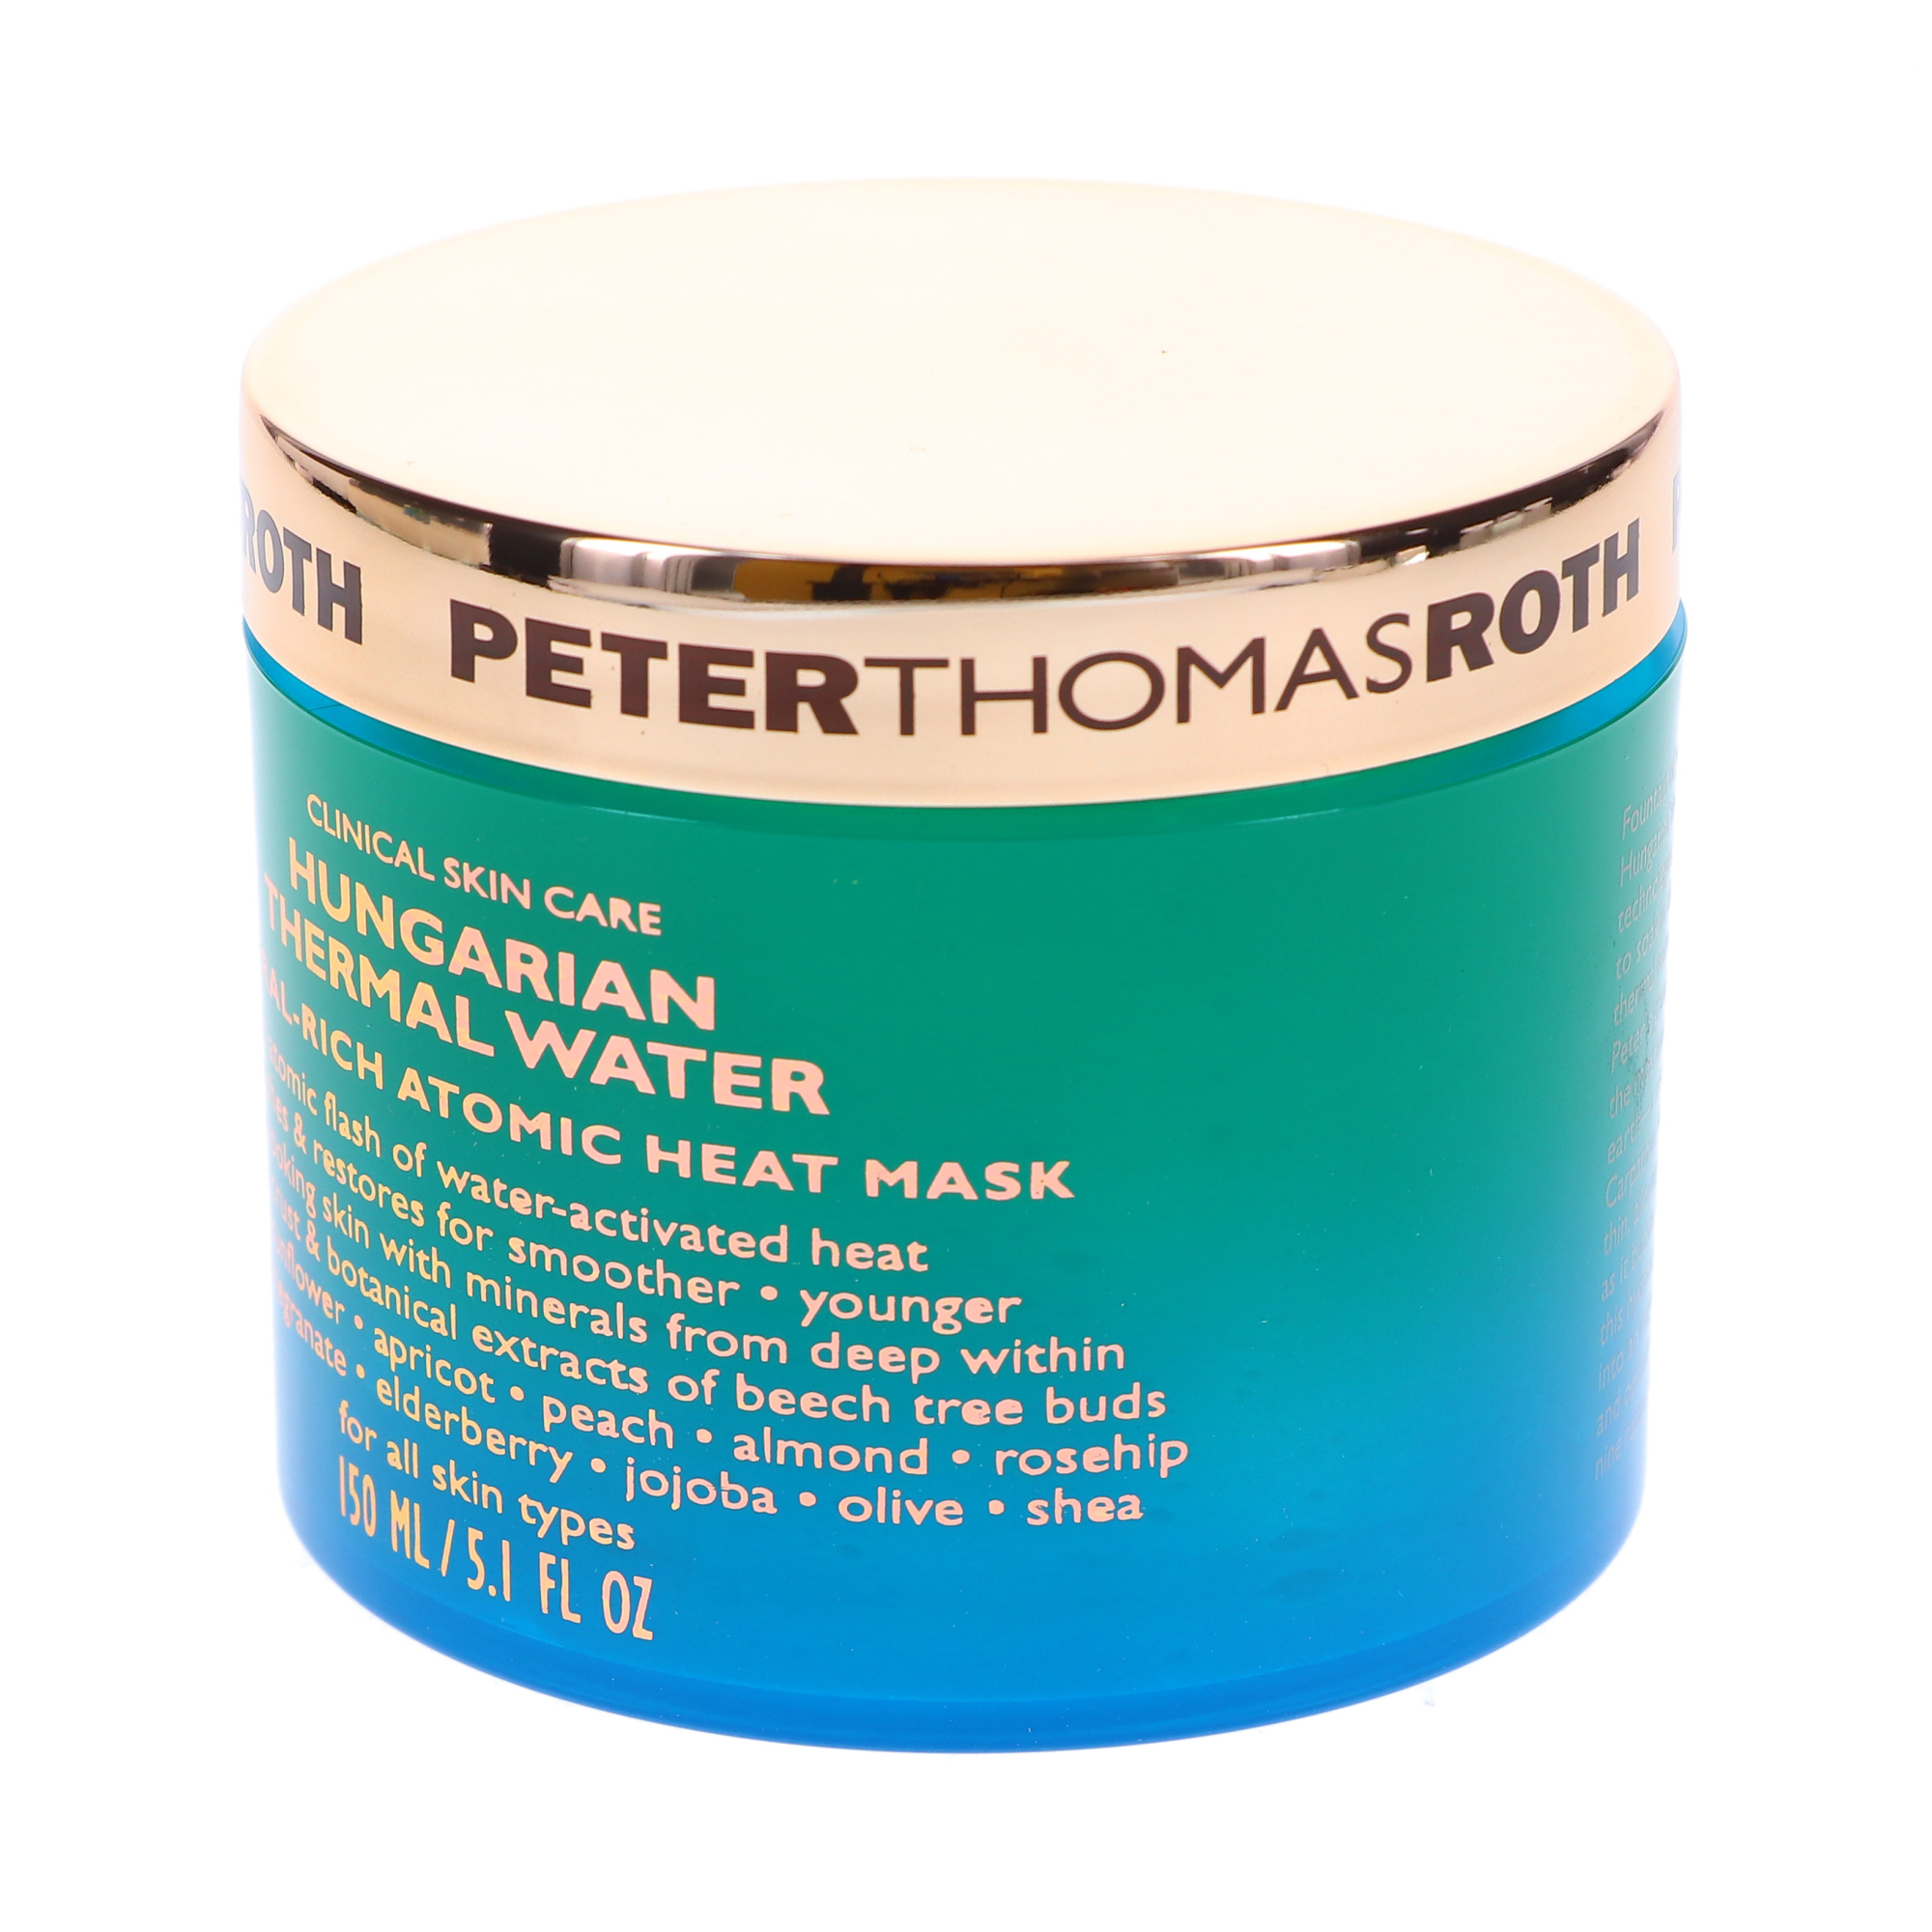 Peter Thomas Roth Hungarian Thermal Water Mineral Rich Atomic Heat Mask 5.1 oz - image 2 of 8